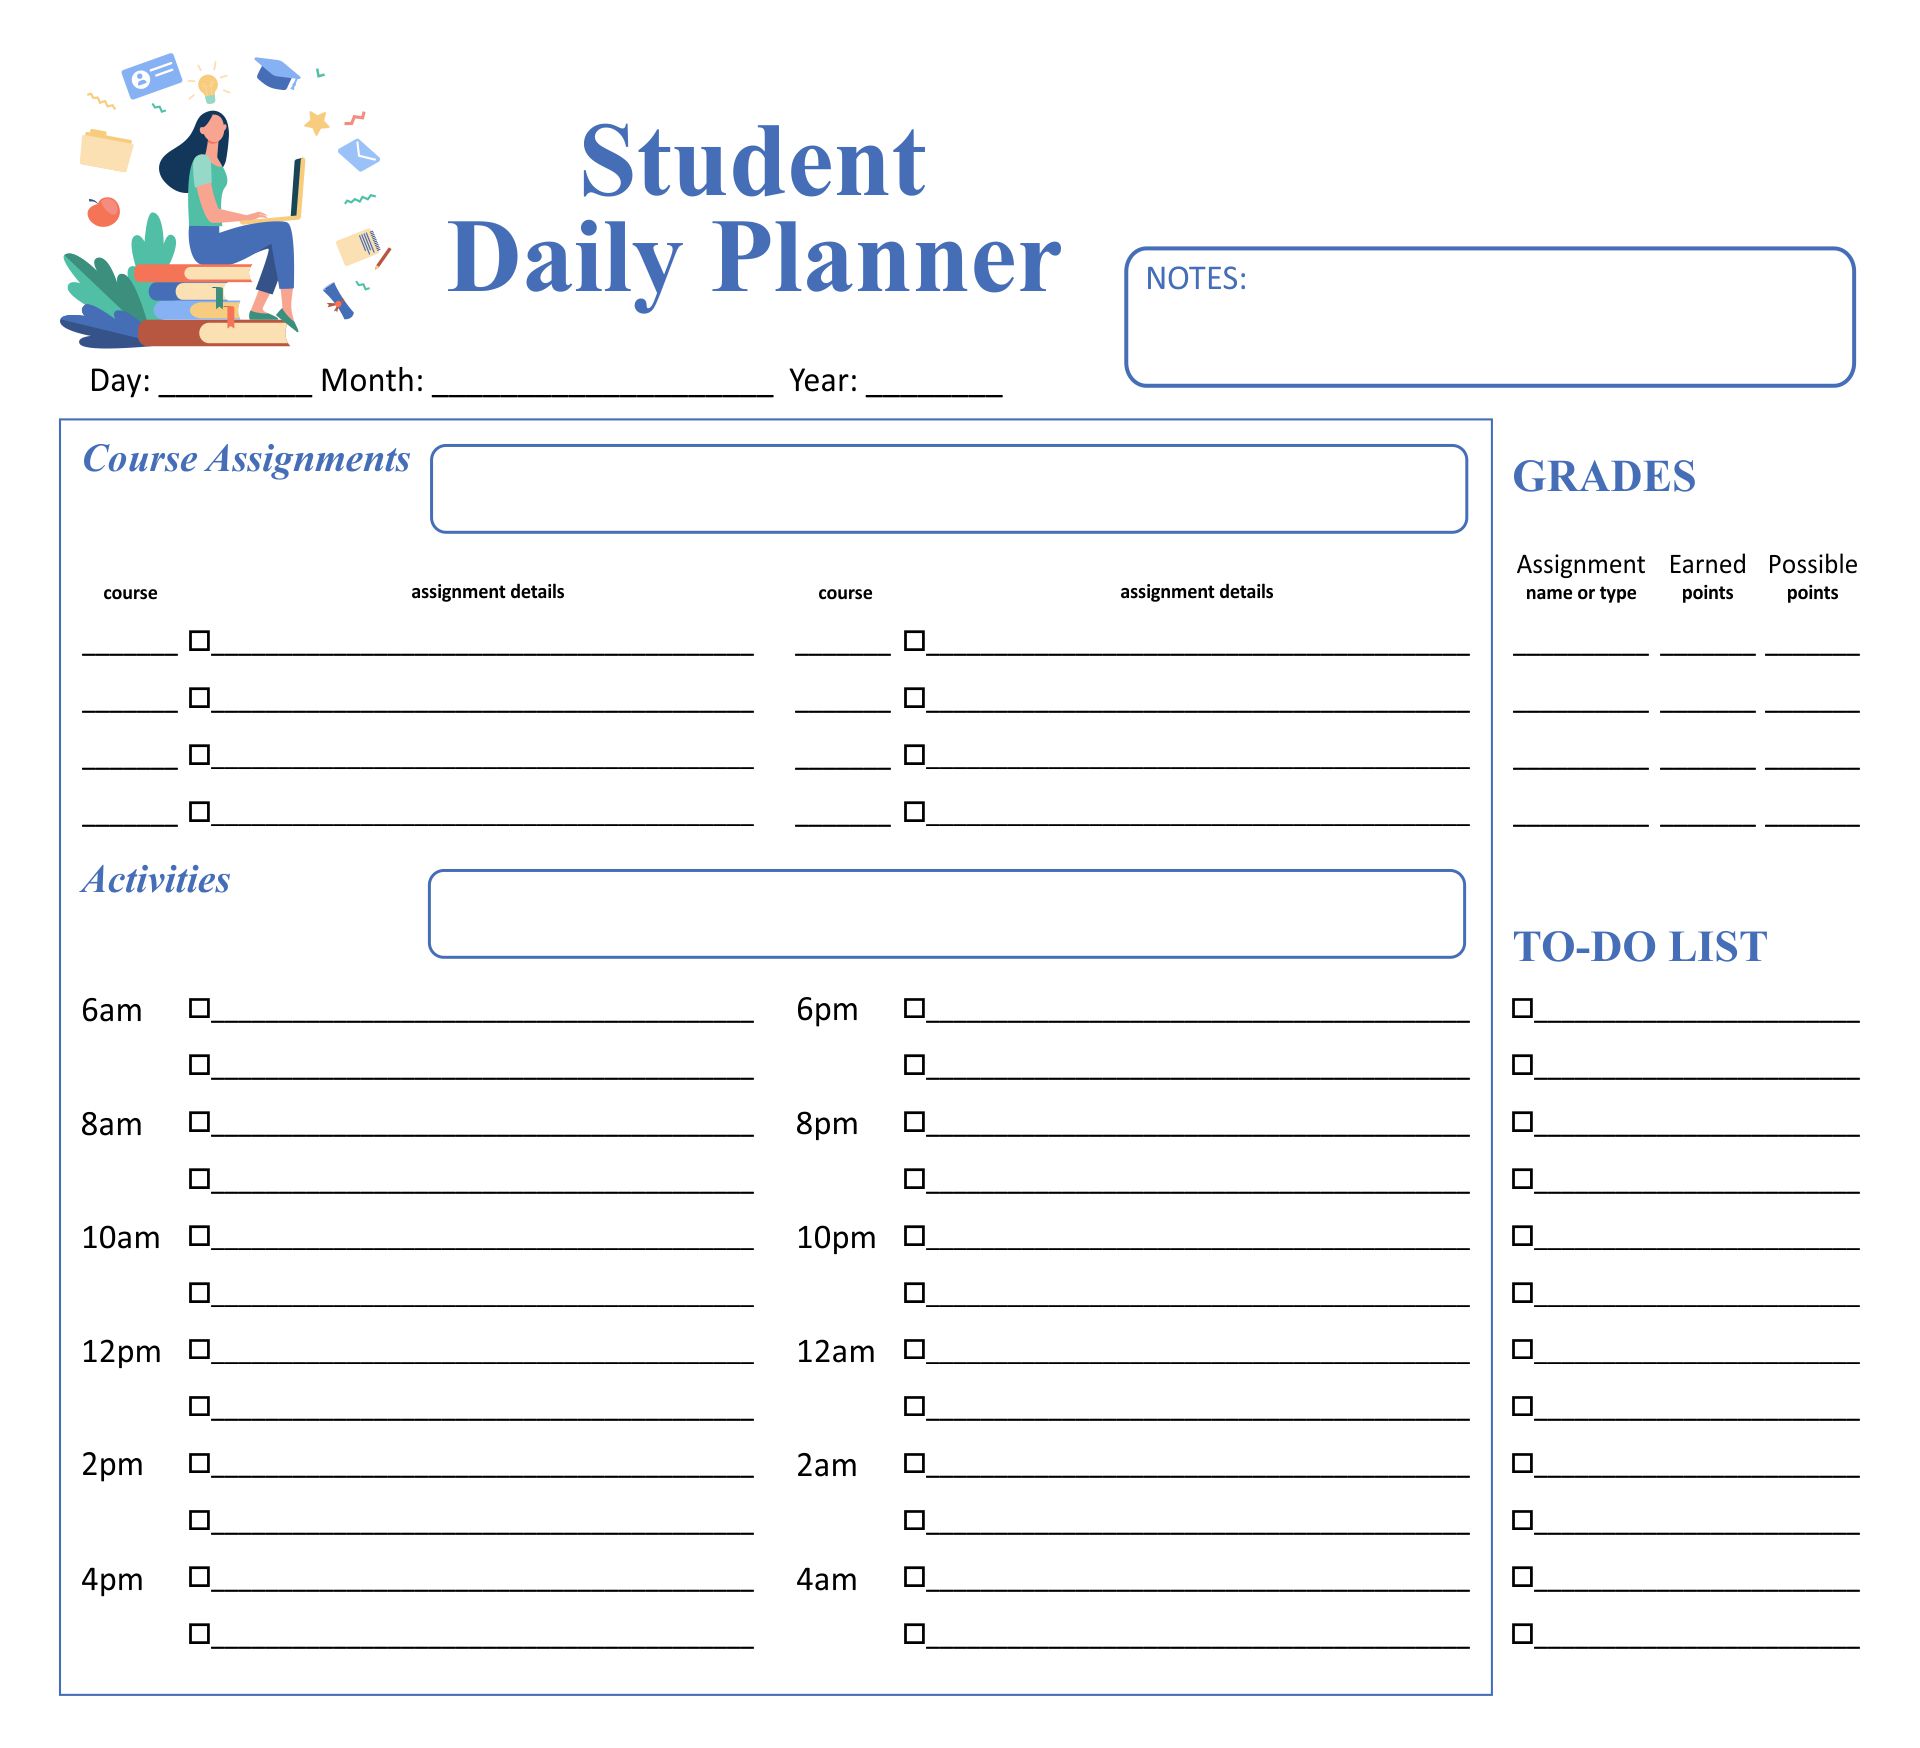 group therapy homework planner pdf